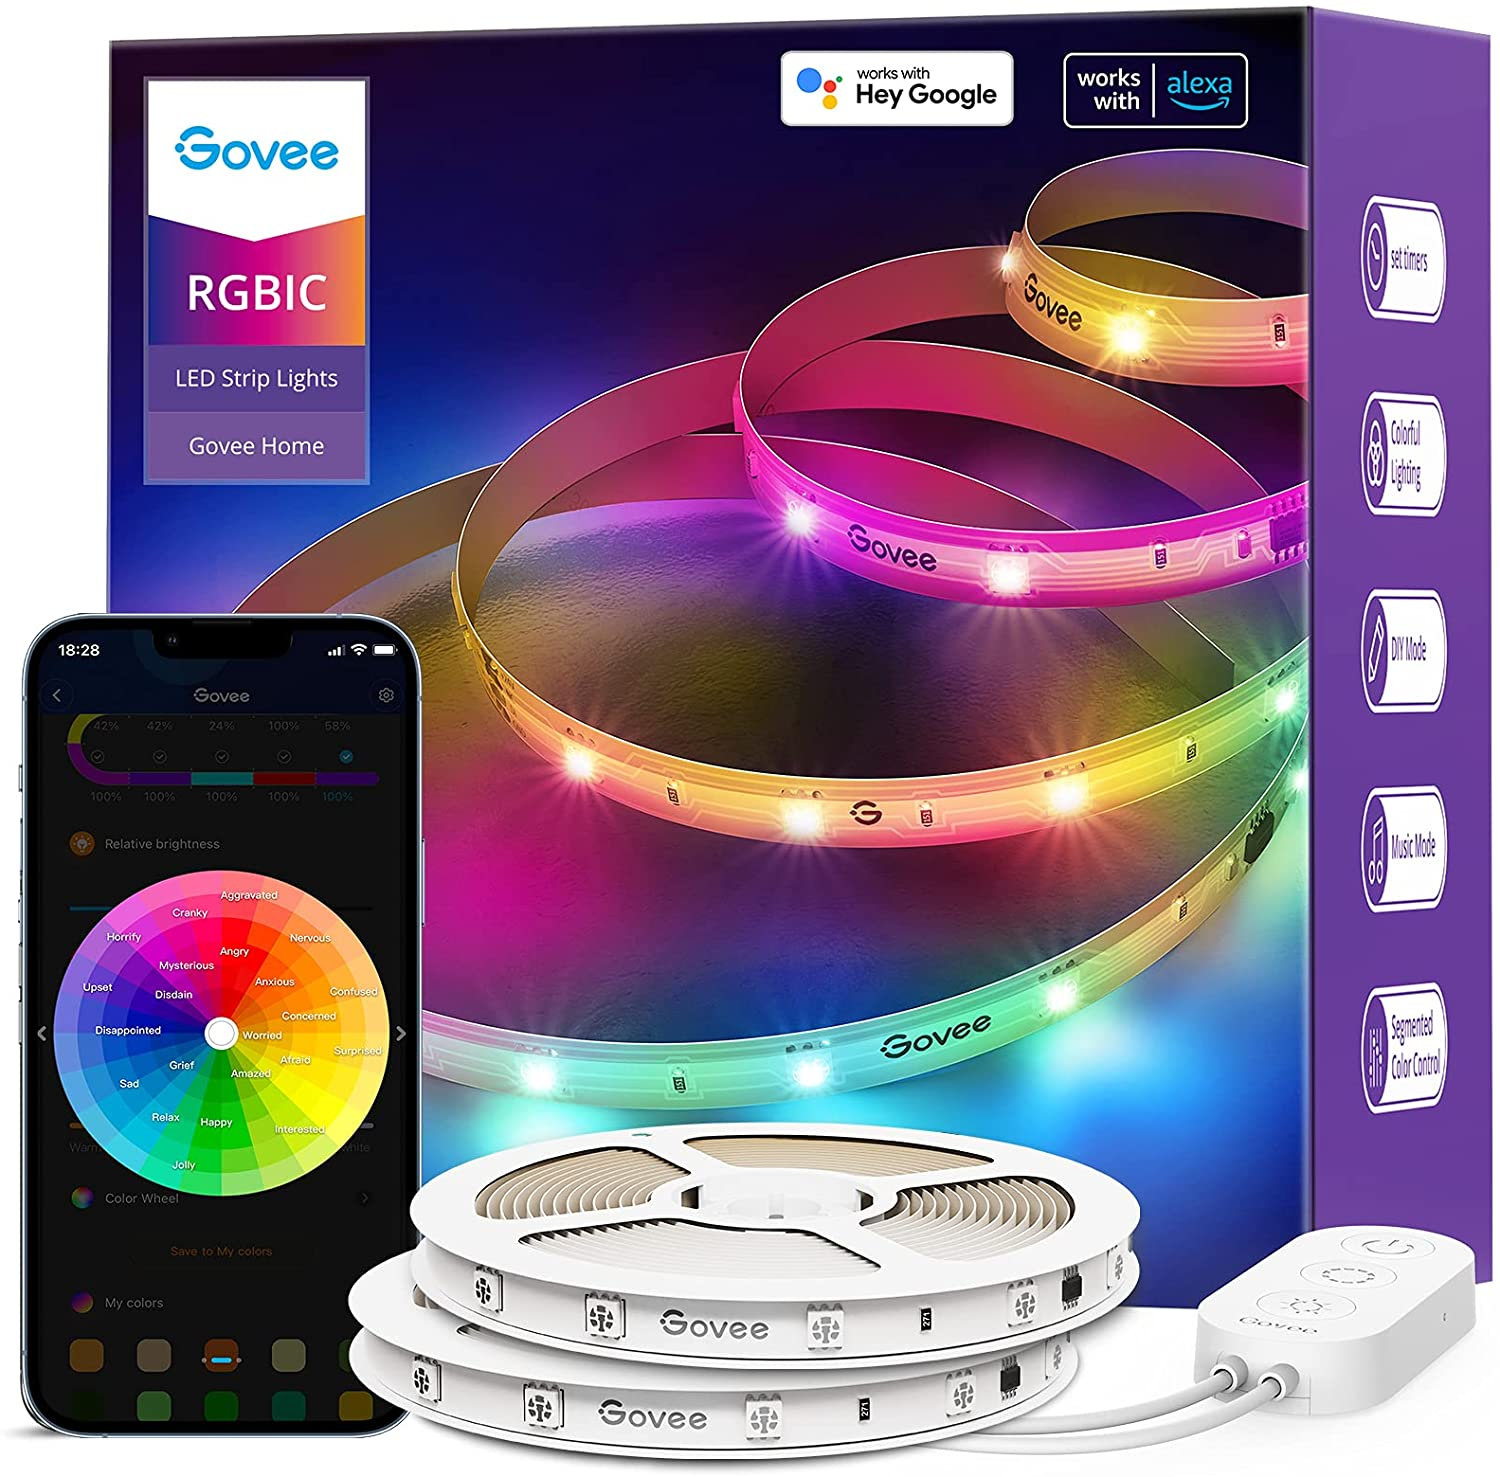 $30 off of $69.99 Govee 65.6ft RGBIC LED Light Strip. Works with Alexa and Google Assistant, Segmented DIY, Music Sync, Color Changing LED. Final price $39.99